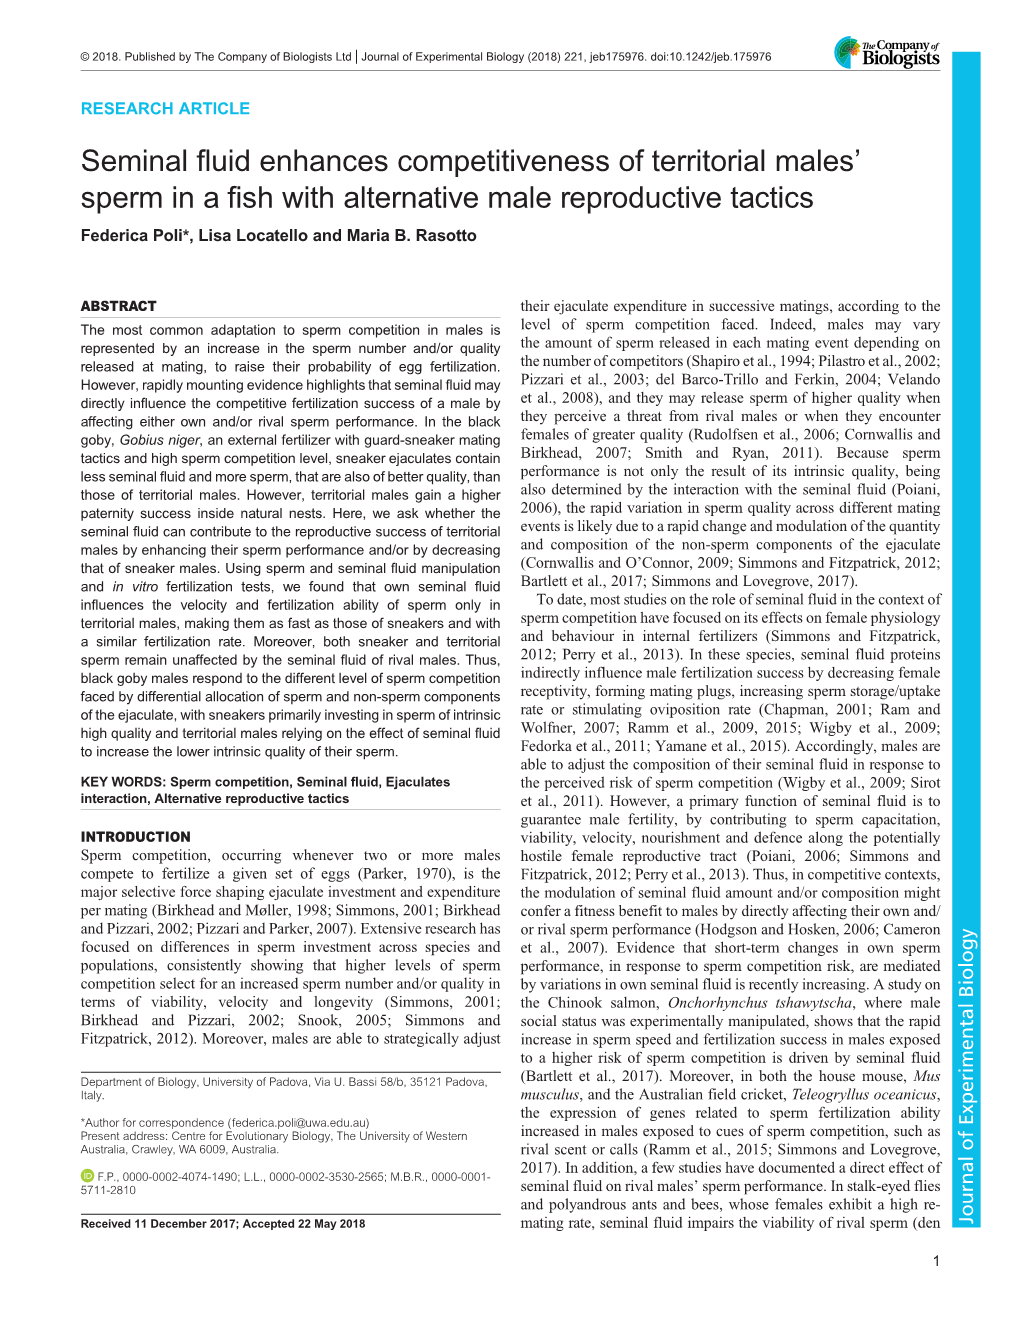 Seminal Fluid Enhances Competitiveness of Territorial Males’ Sperm in a Fish with Alternative Male Reproductive Tactics Federica Poli*, Lisa Locatello and Maria B